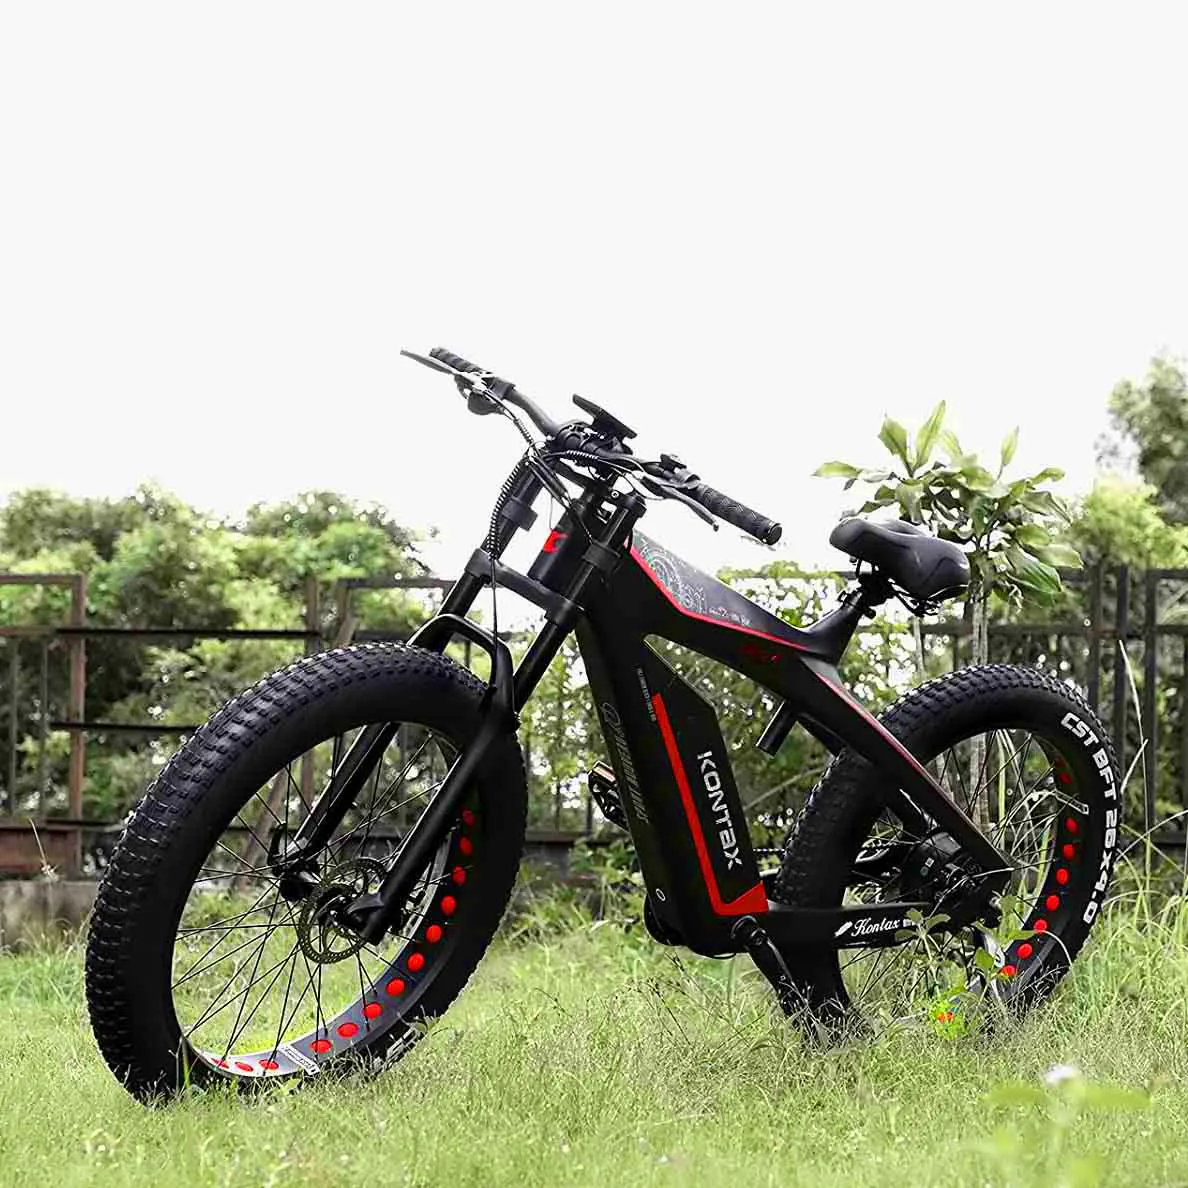 

KONTAX 48V 1000w Electric Dirt Bike Adult 13Ah 26 Inch Fat Tire Electric Bike E Cycle With Pedal Assist System, Customizable